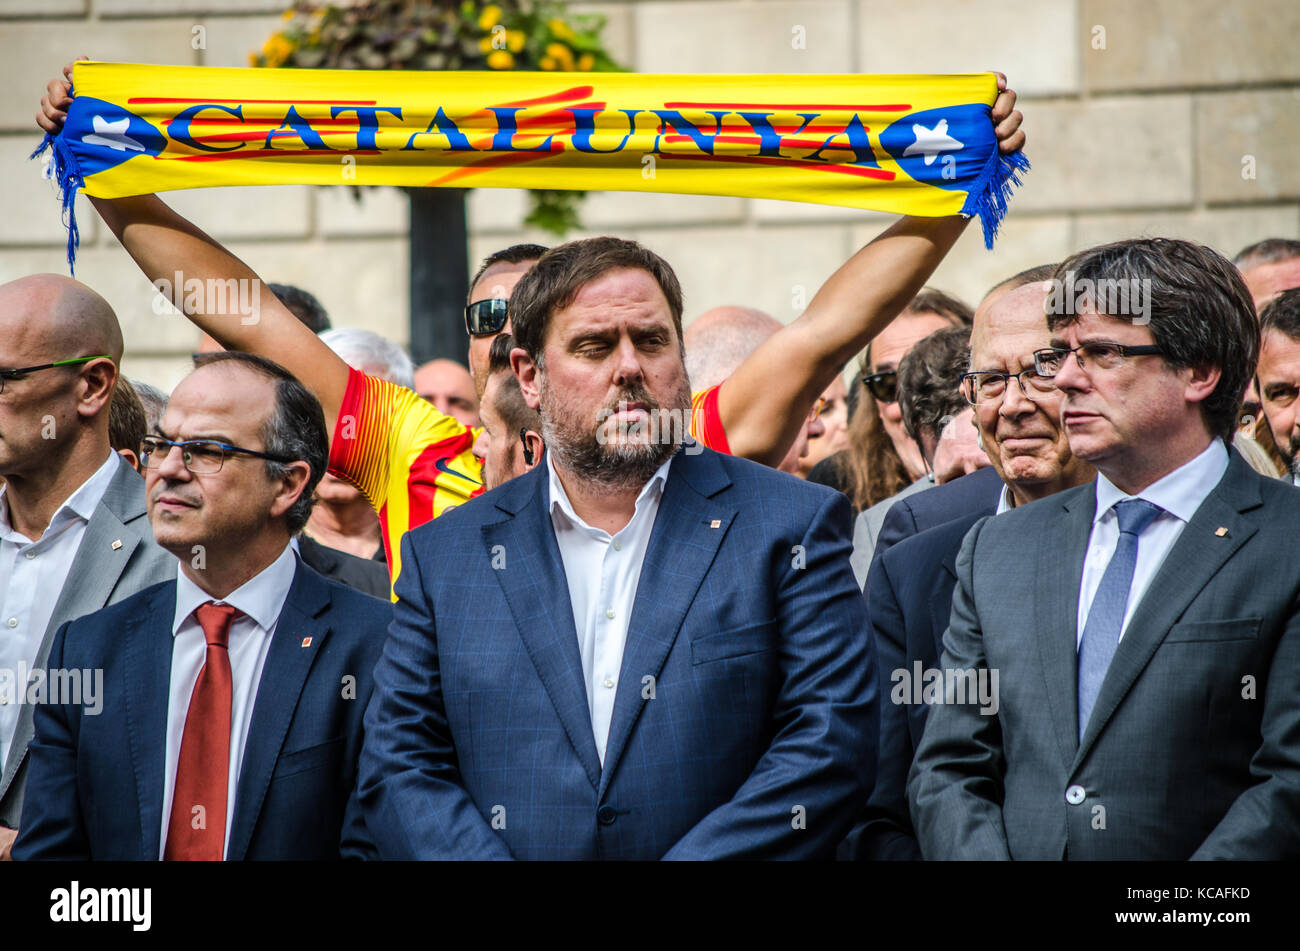 Barcelona, Spain. 3rd Oct, 2017. Jordi Turull, Oriol Junqueras, Carles Puigdemont, (left to right) are seen during the minute of silence, while a man raising in the air a Catalonia scarf. The Catalan Government and the city of Barcelona gathered for a minute of silence as a sign of rejection against Police brutality, in the San Jauma Plaza, headquarters of both administrations. Stock Photo